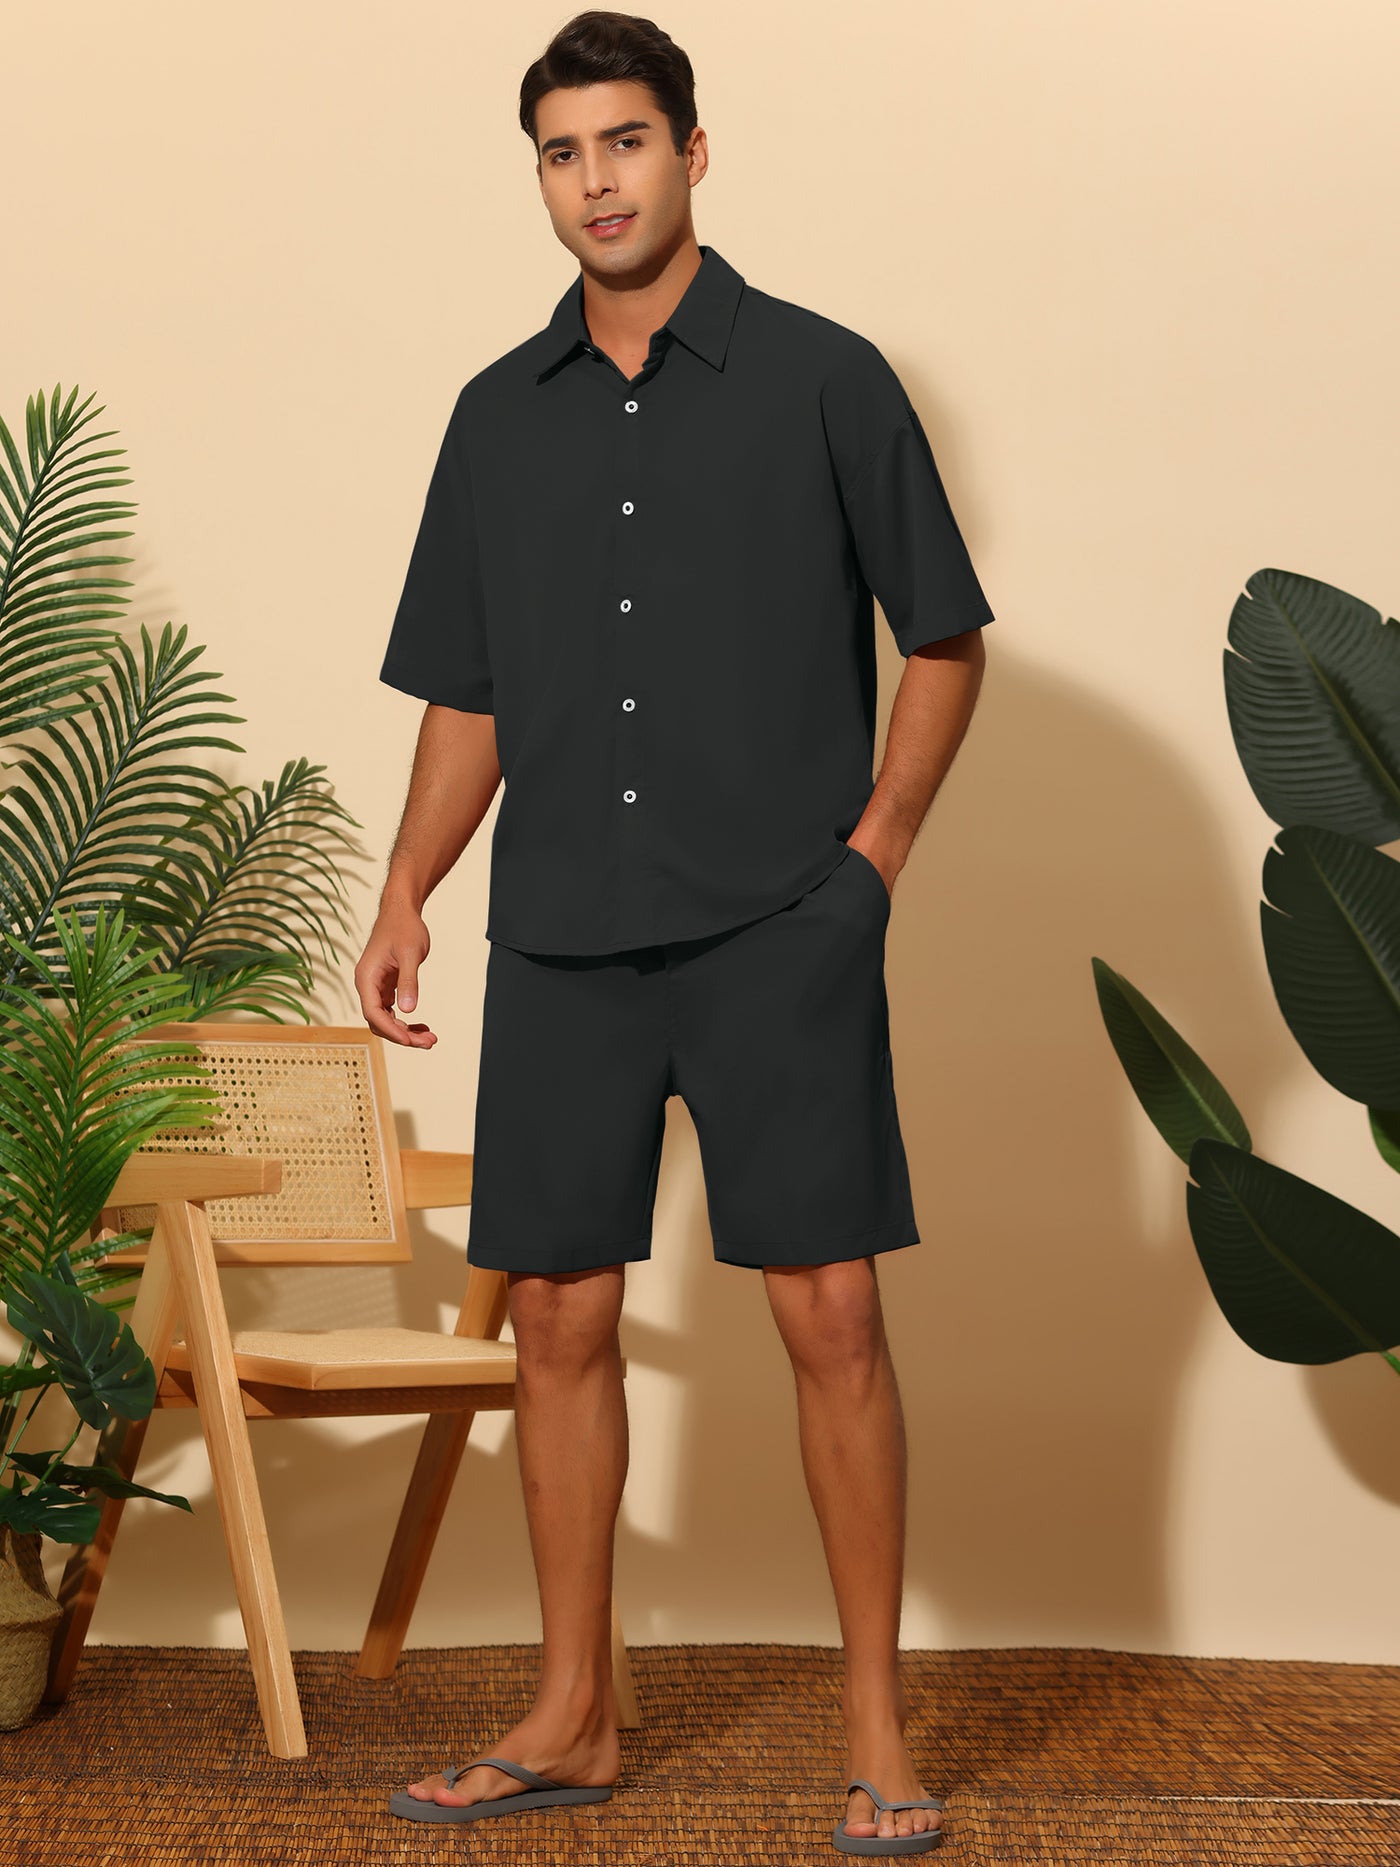 Bublédon Hawaiian Sets for Men's Short Sleeve Button Down Shirt and Shorts Summer 2 Pieces Suit